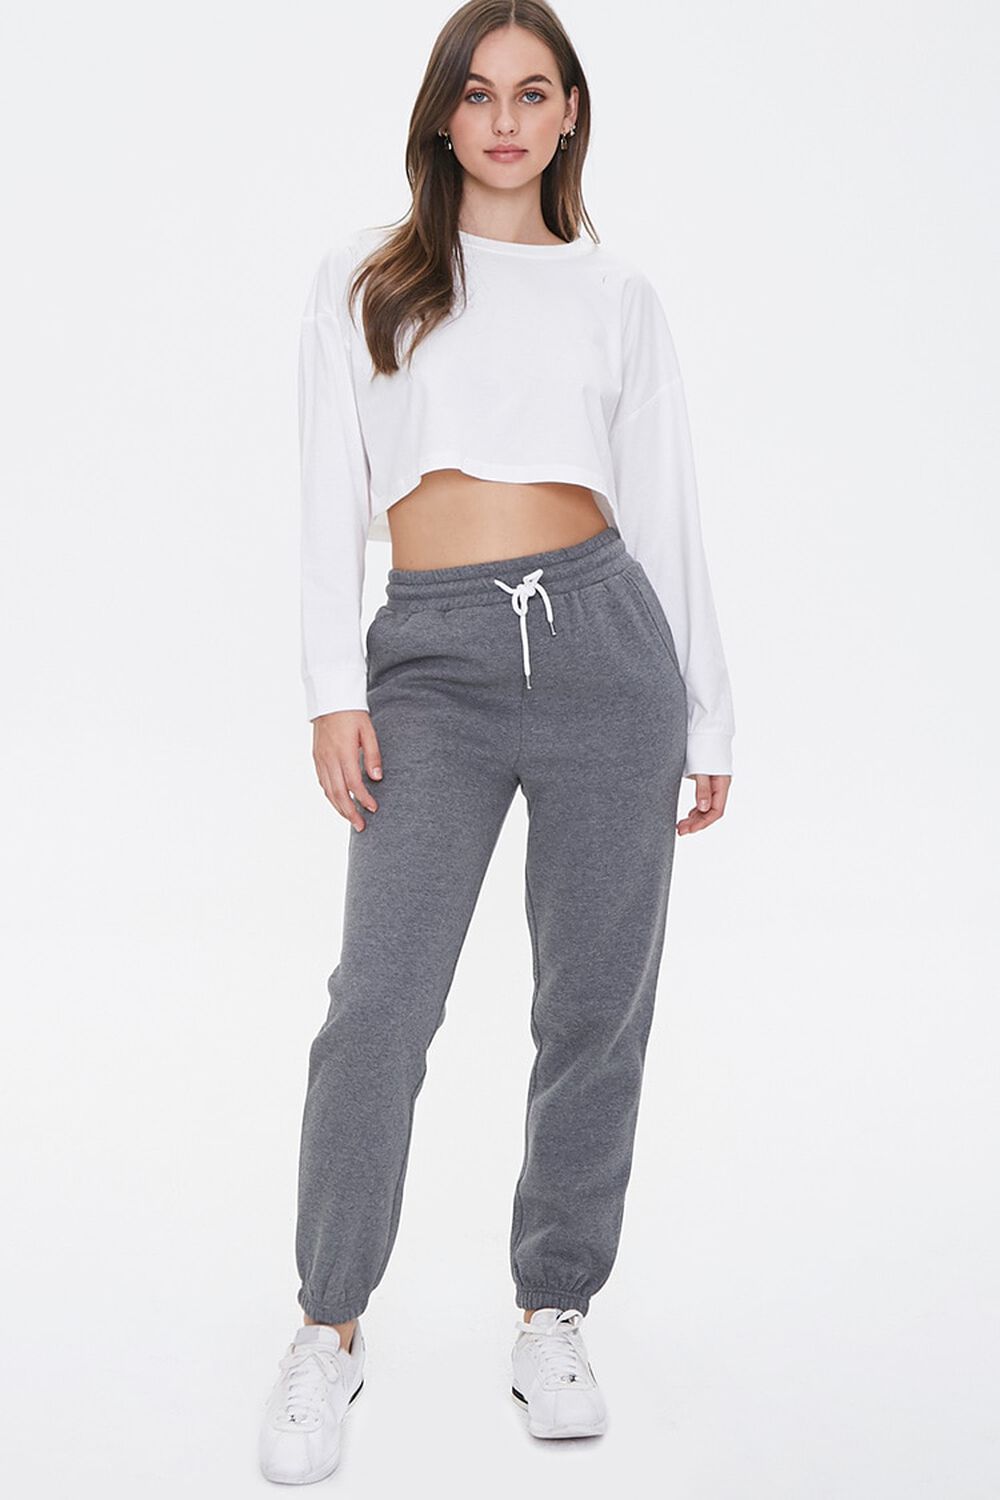 French Terry Drawstring Pants